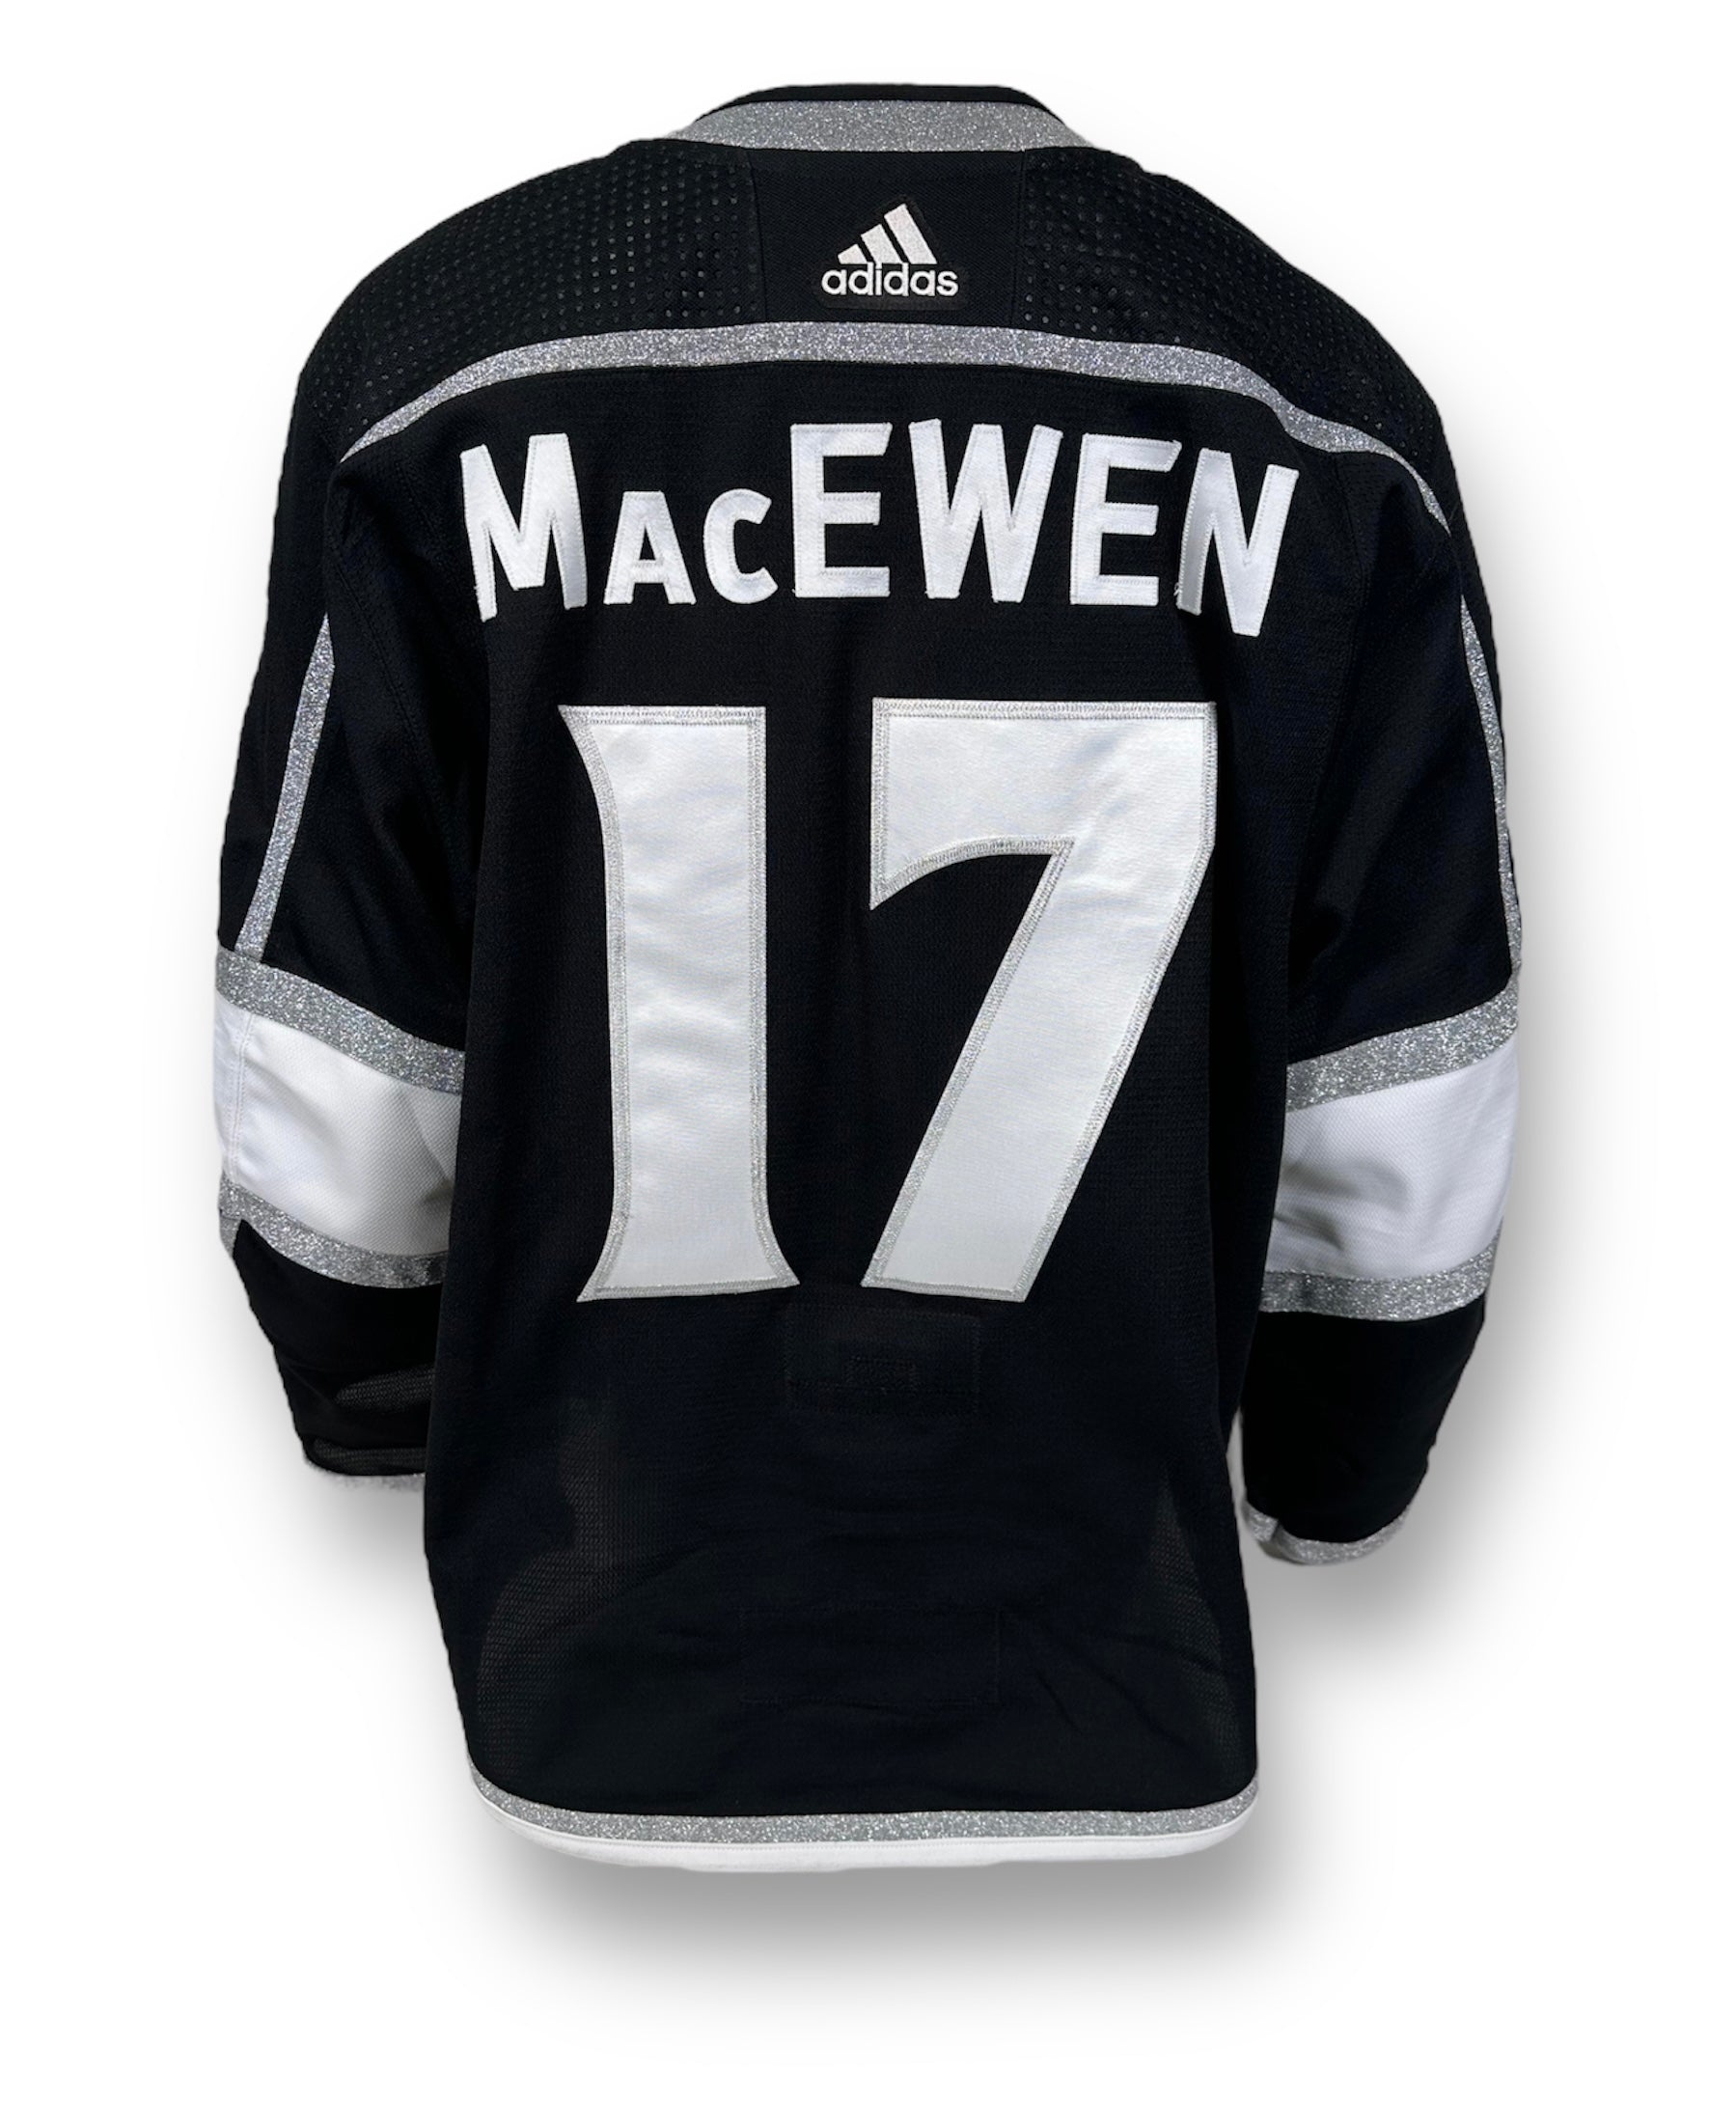 Los Angeles Kings championship jersey